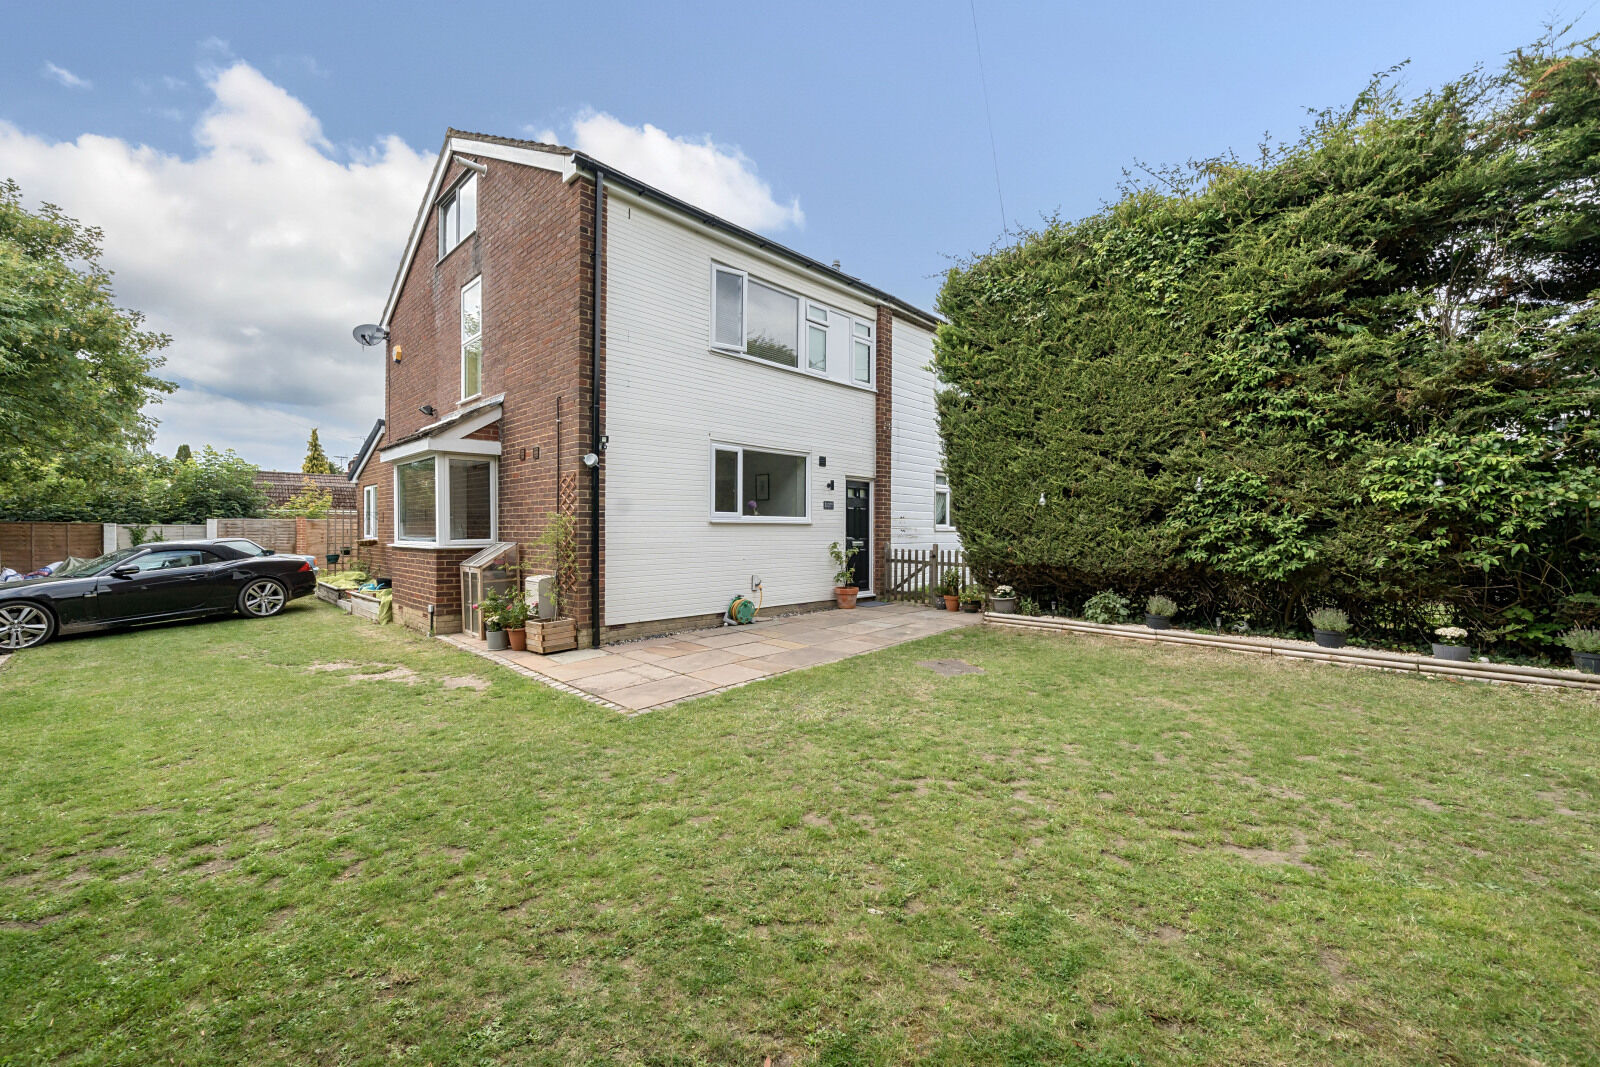 3 bedroom end terraced house for sale Campbells Green, Mortimer Common, RG7, main image